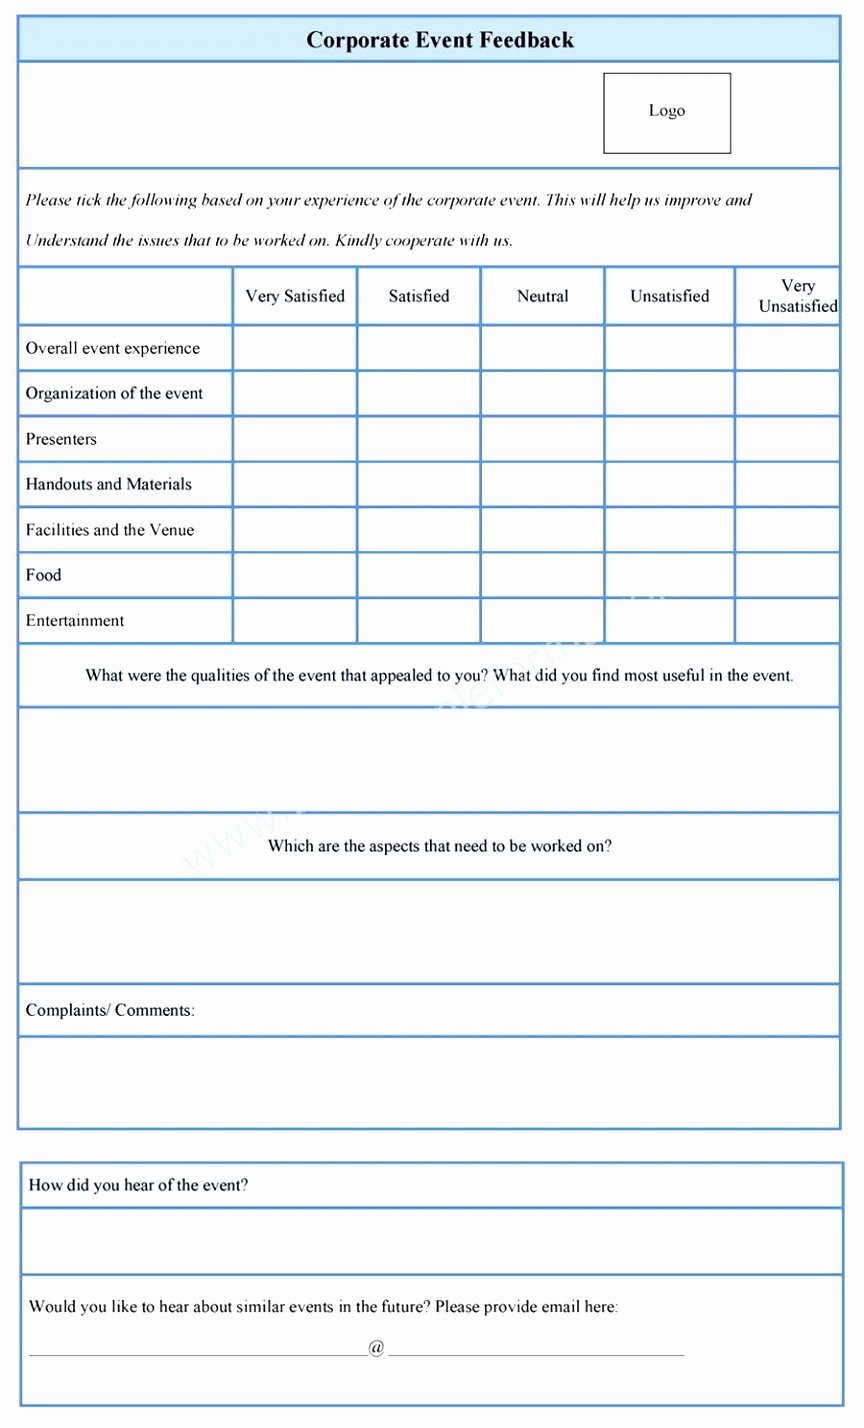 Feedback form Template Word New 9 Student Feedback form Template Word Uitry